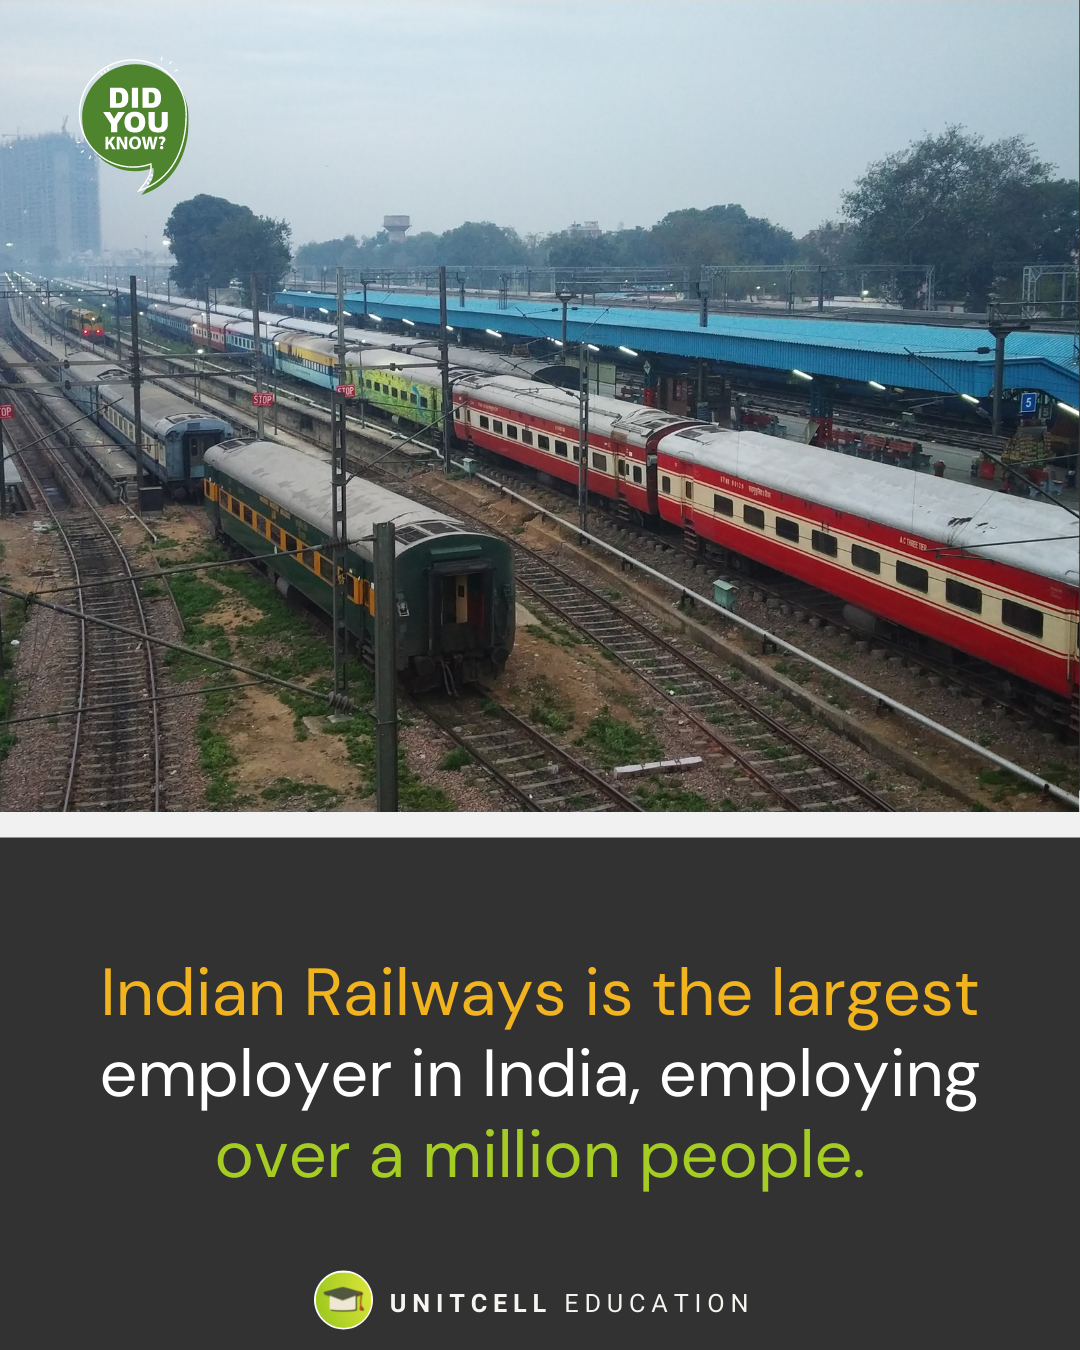 Indian Railways is the largest employer in India, employing over a million people.